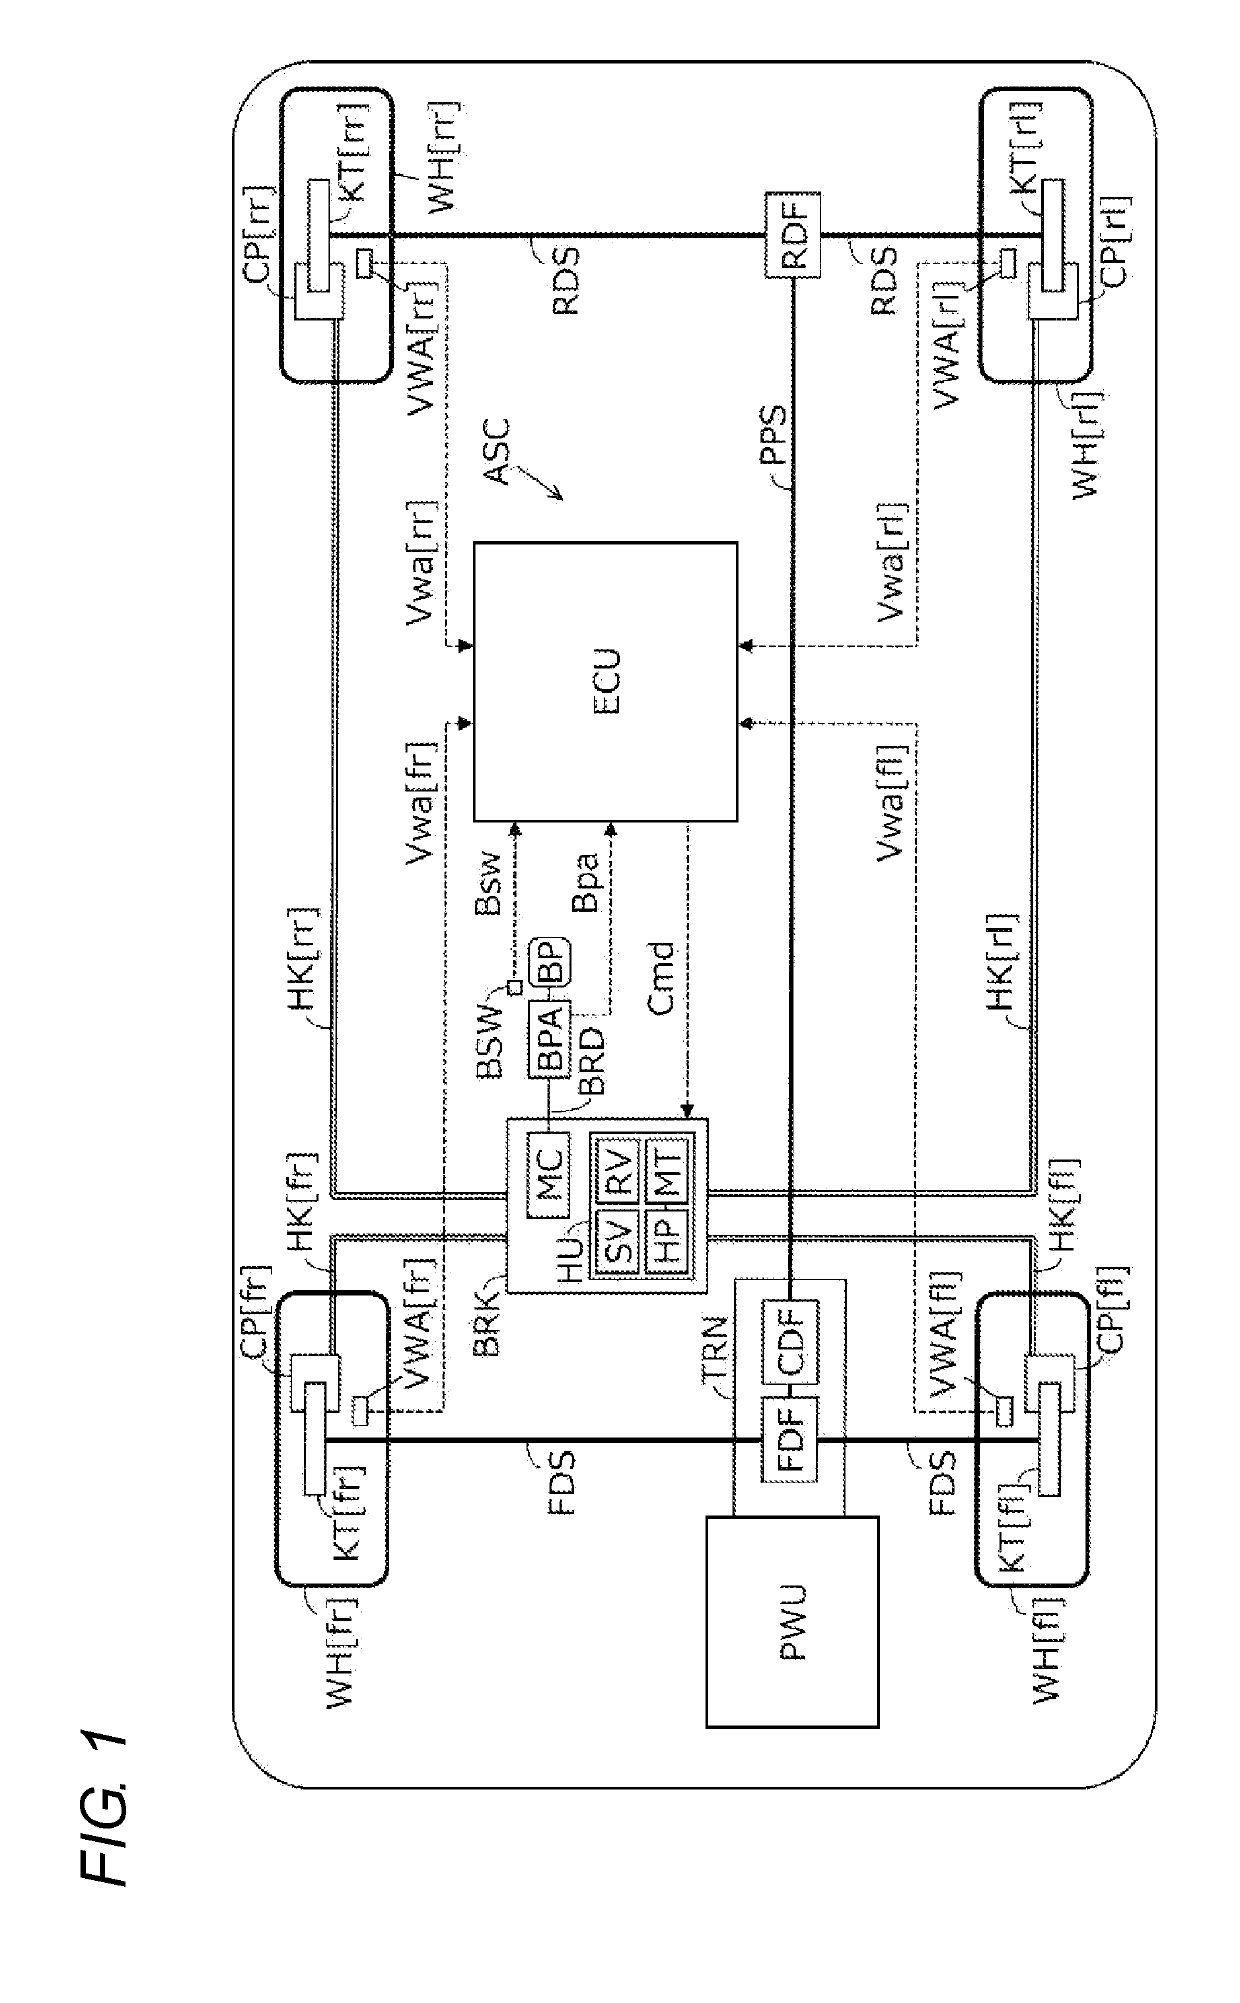 Anti-skid control device for vehicle